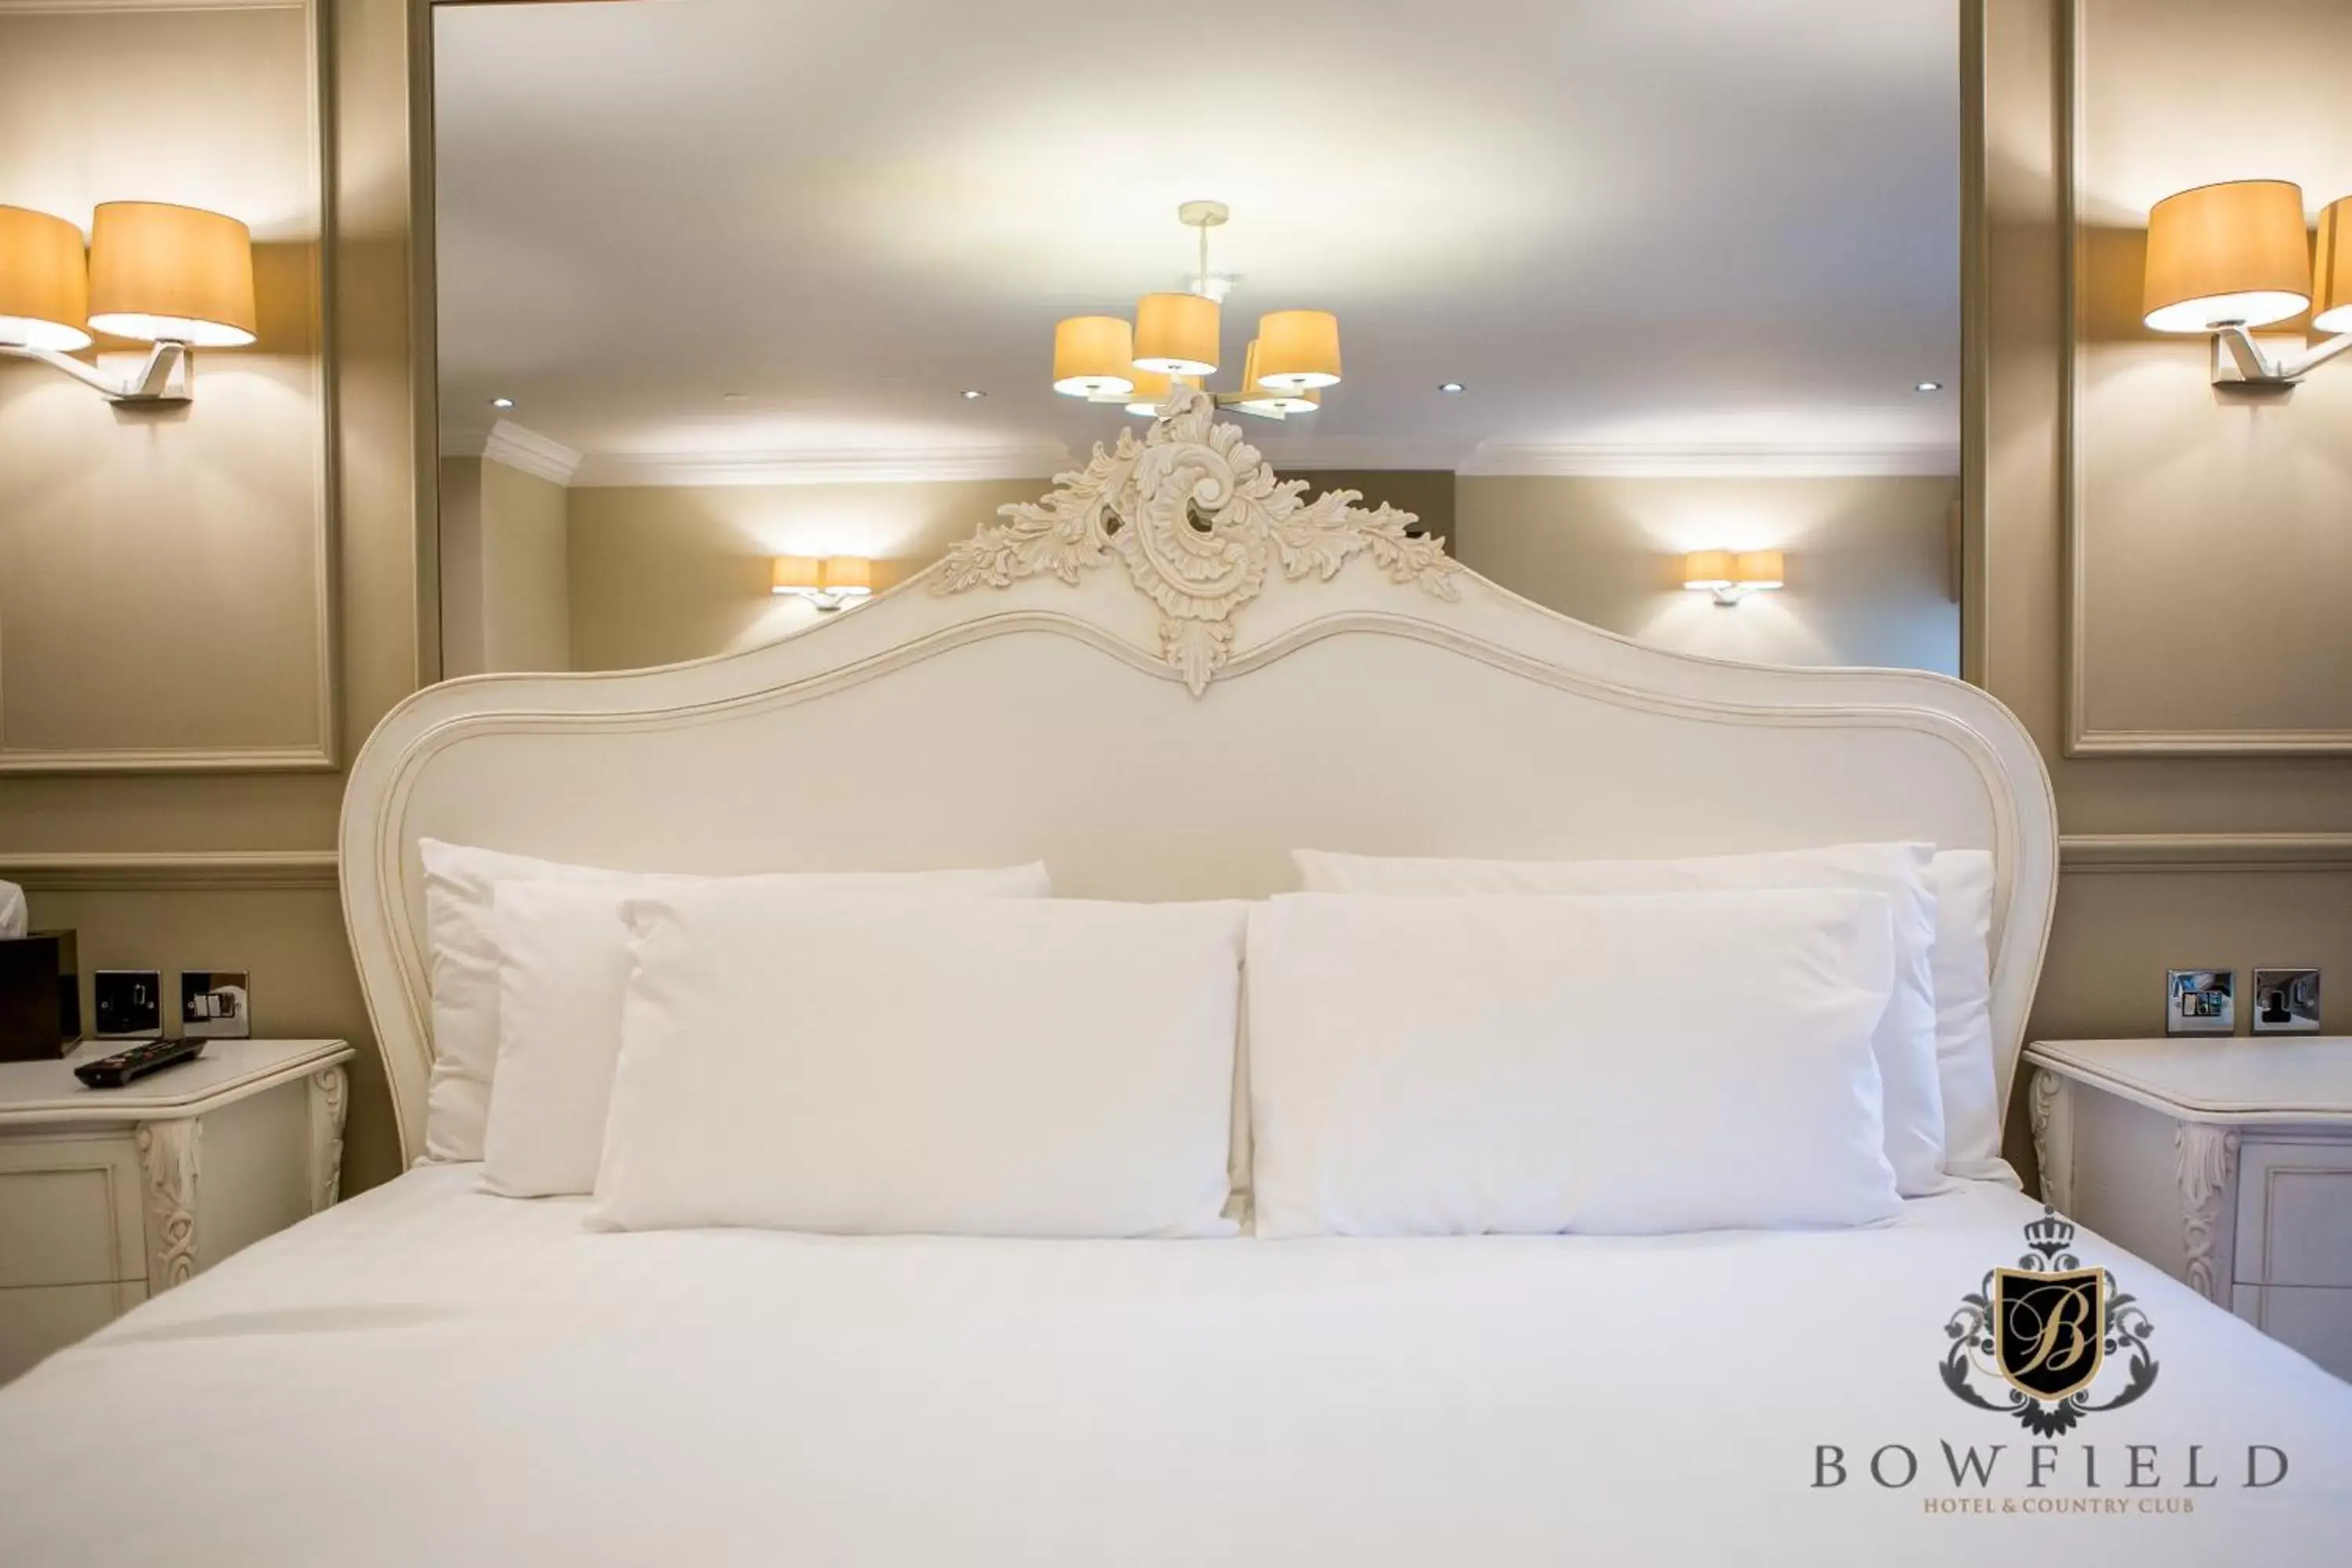 Bed, Room Photo in Bowfield Hotel and Spa